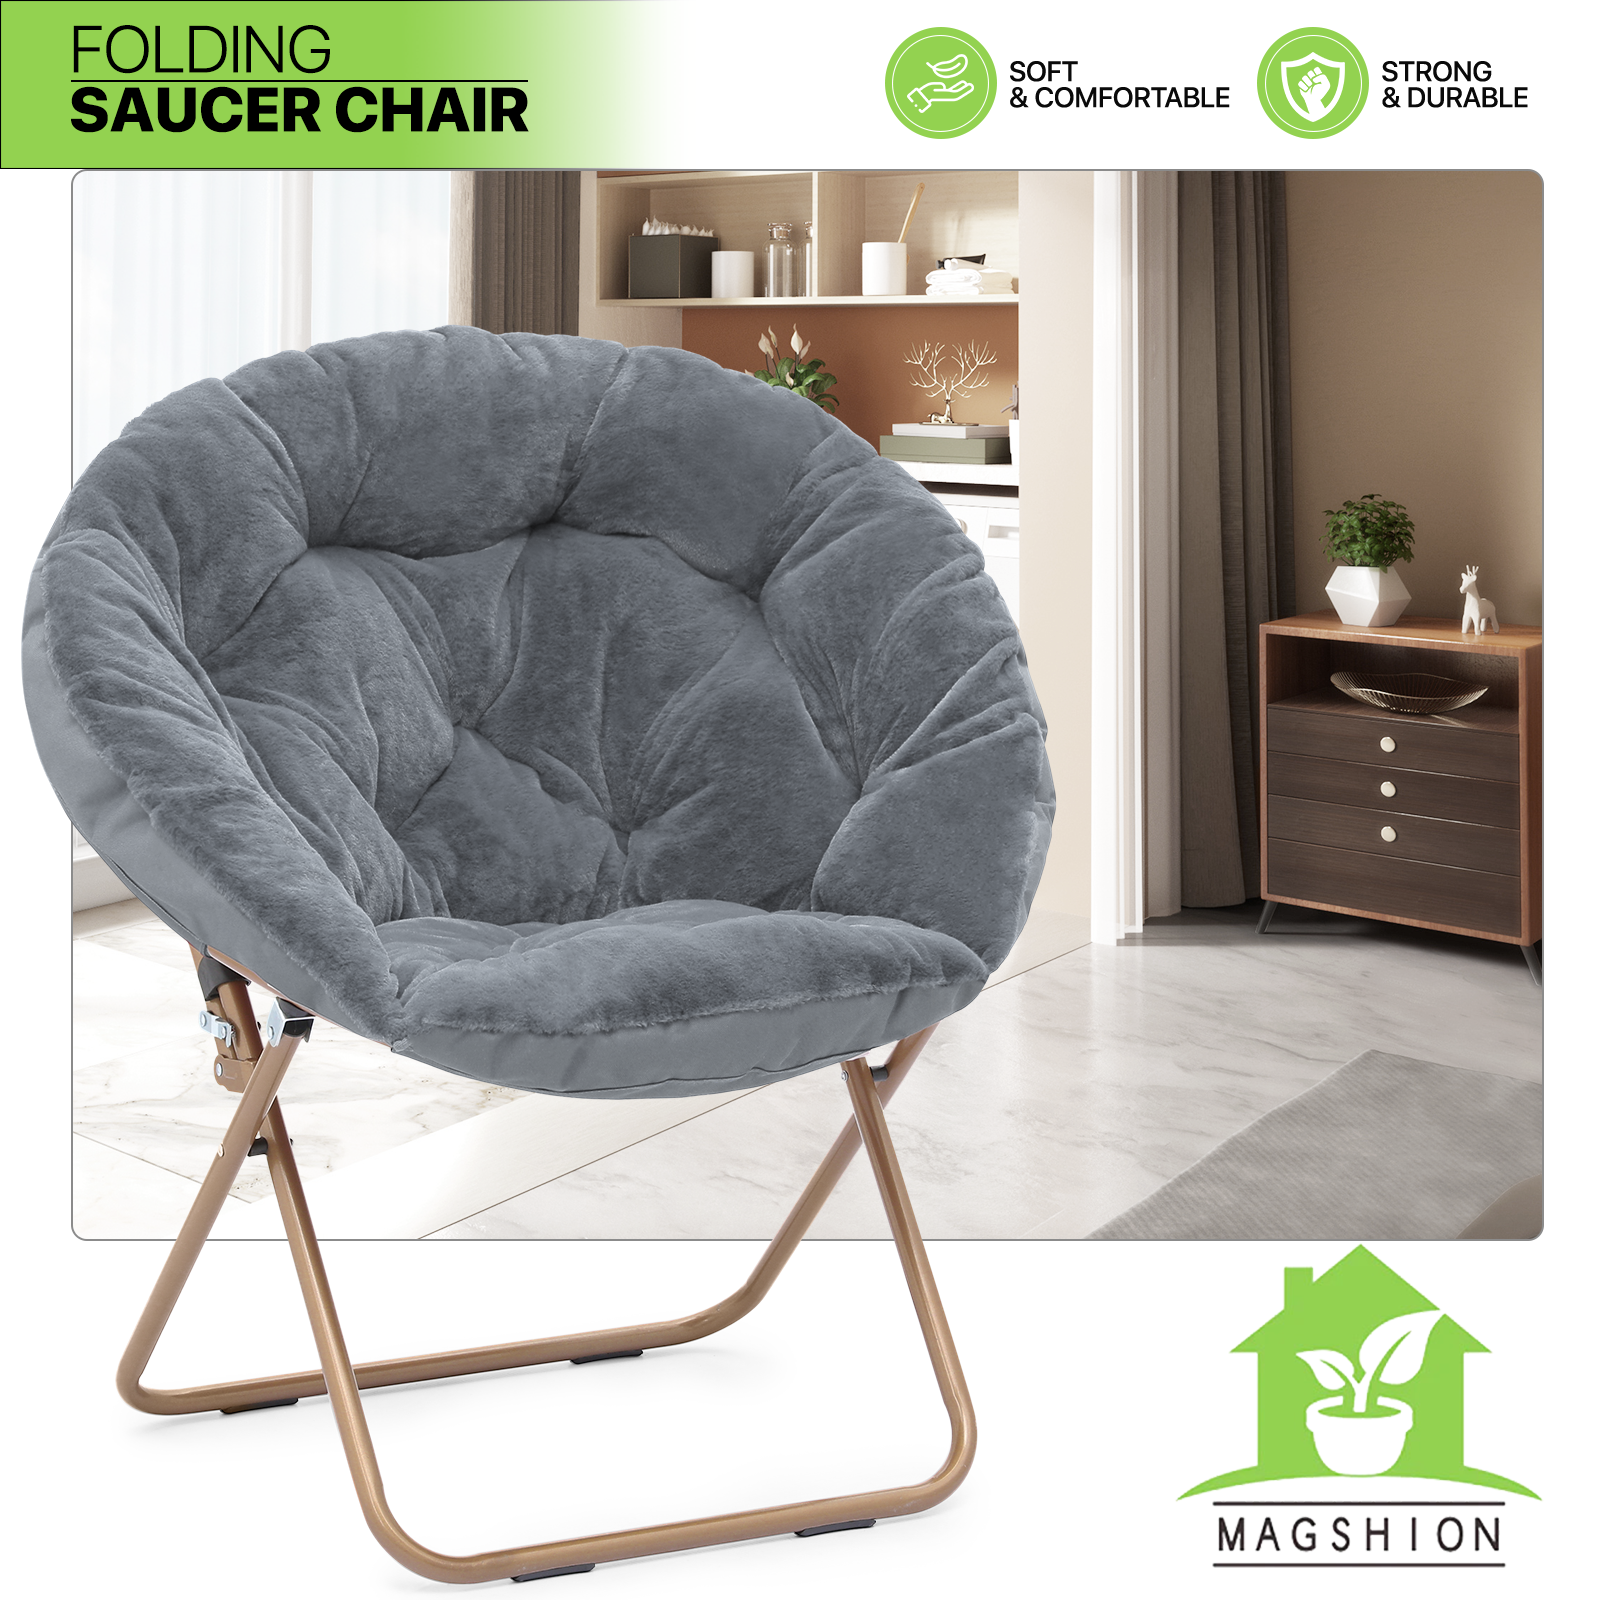 Magshion 33" Folding Saucer Chair, Soft Faux Fur Oversized Collapsible Accent Chair Lounge Moon Chair with Metal Frame for Bedroom, Gray - image 2 of 10